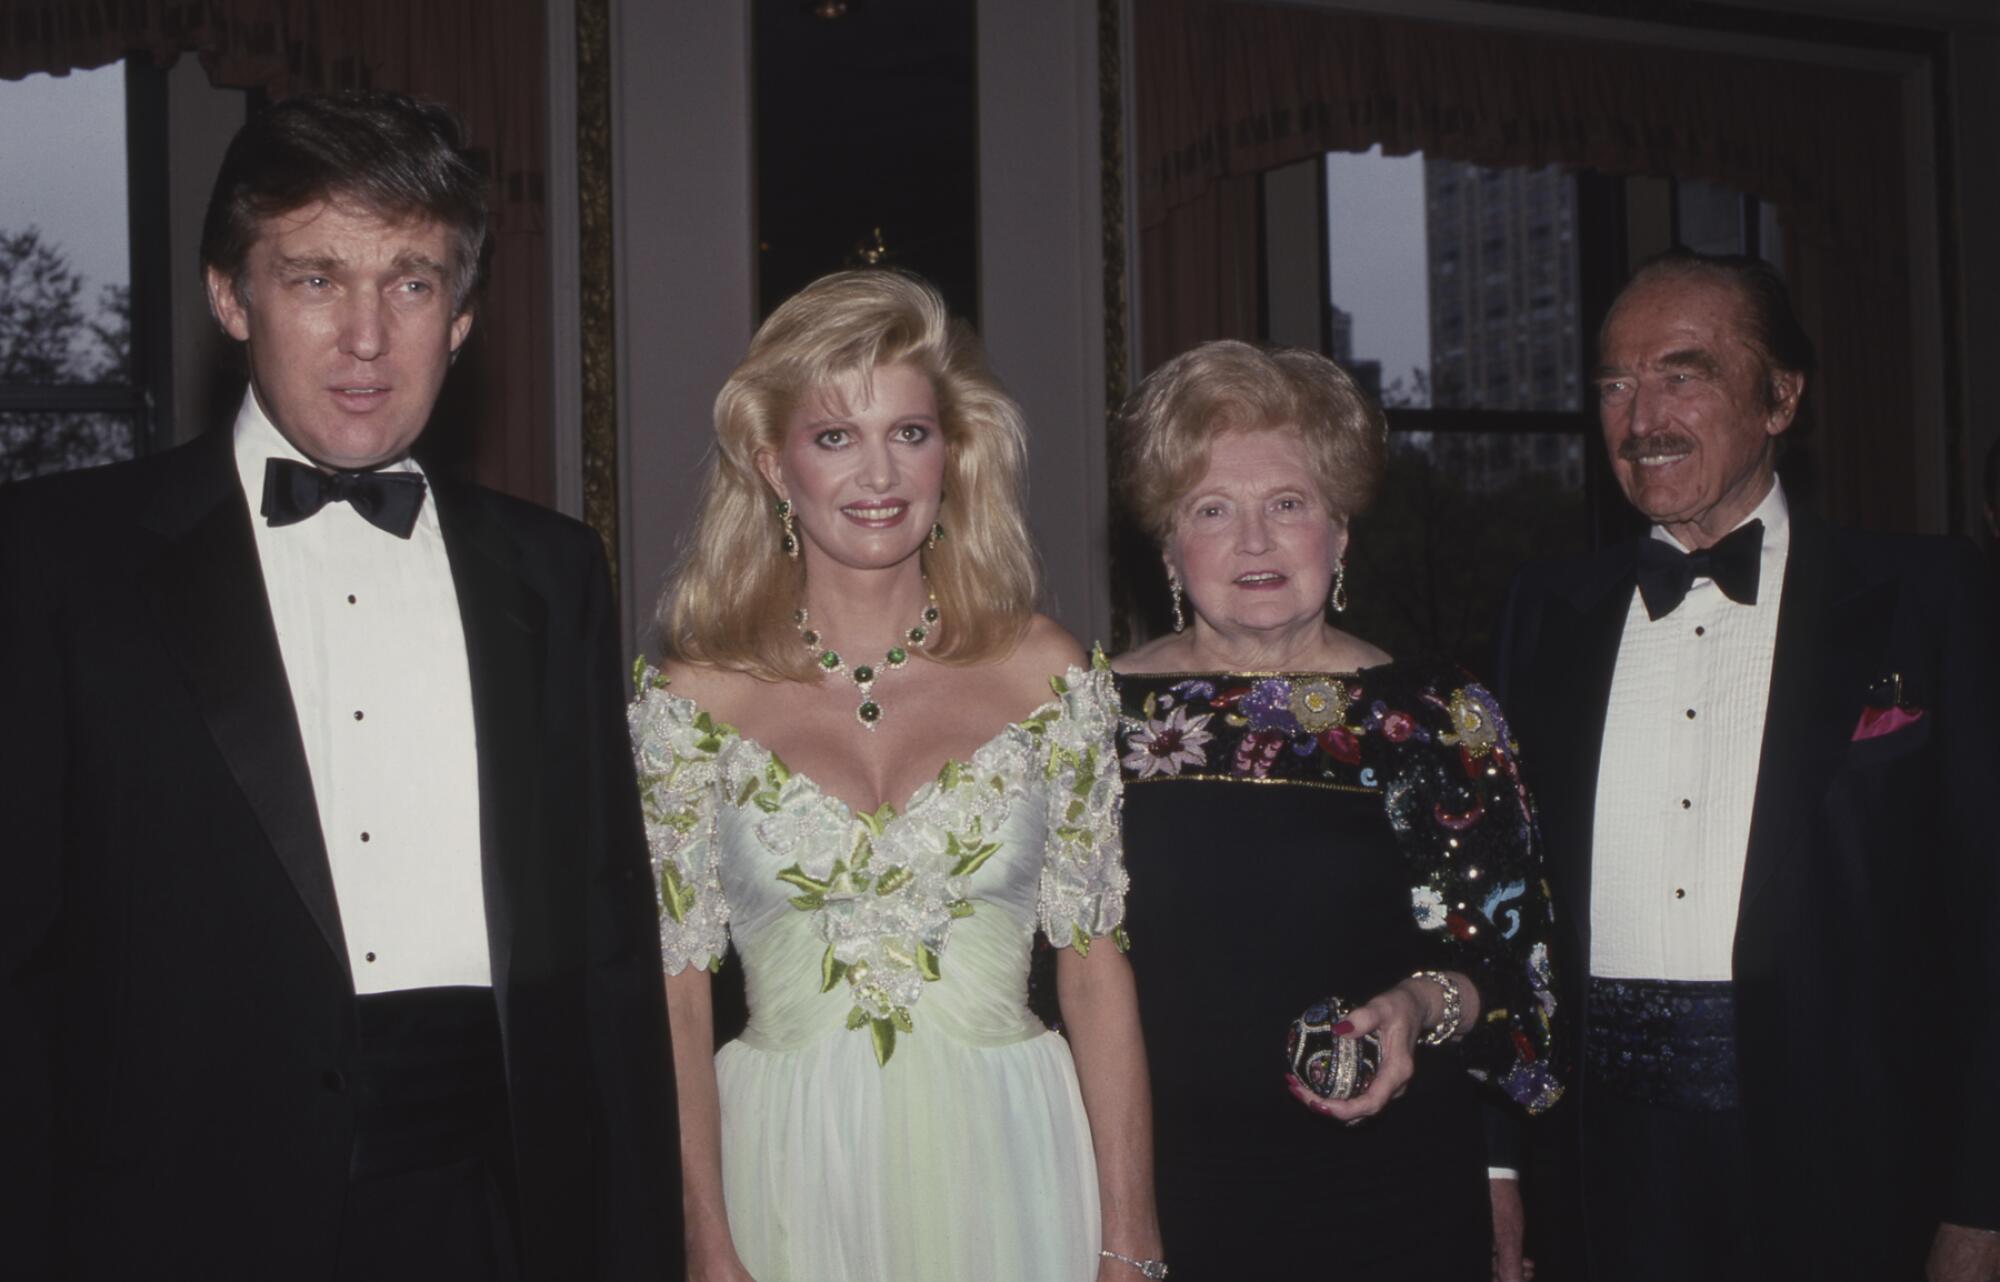 Two women, one in a cream-colored evening dress and the other in a black one, are flanked by men in dark suits and bow ties